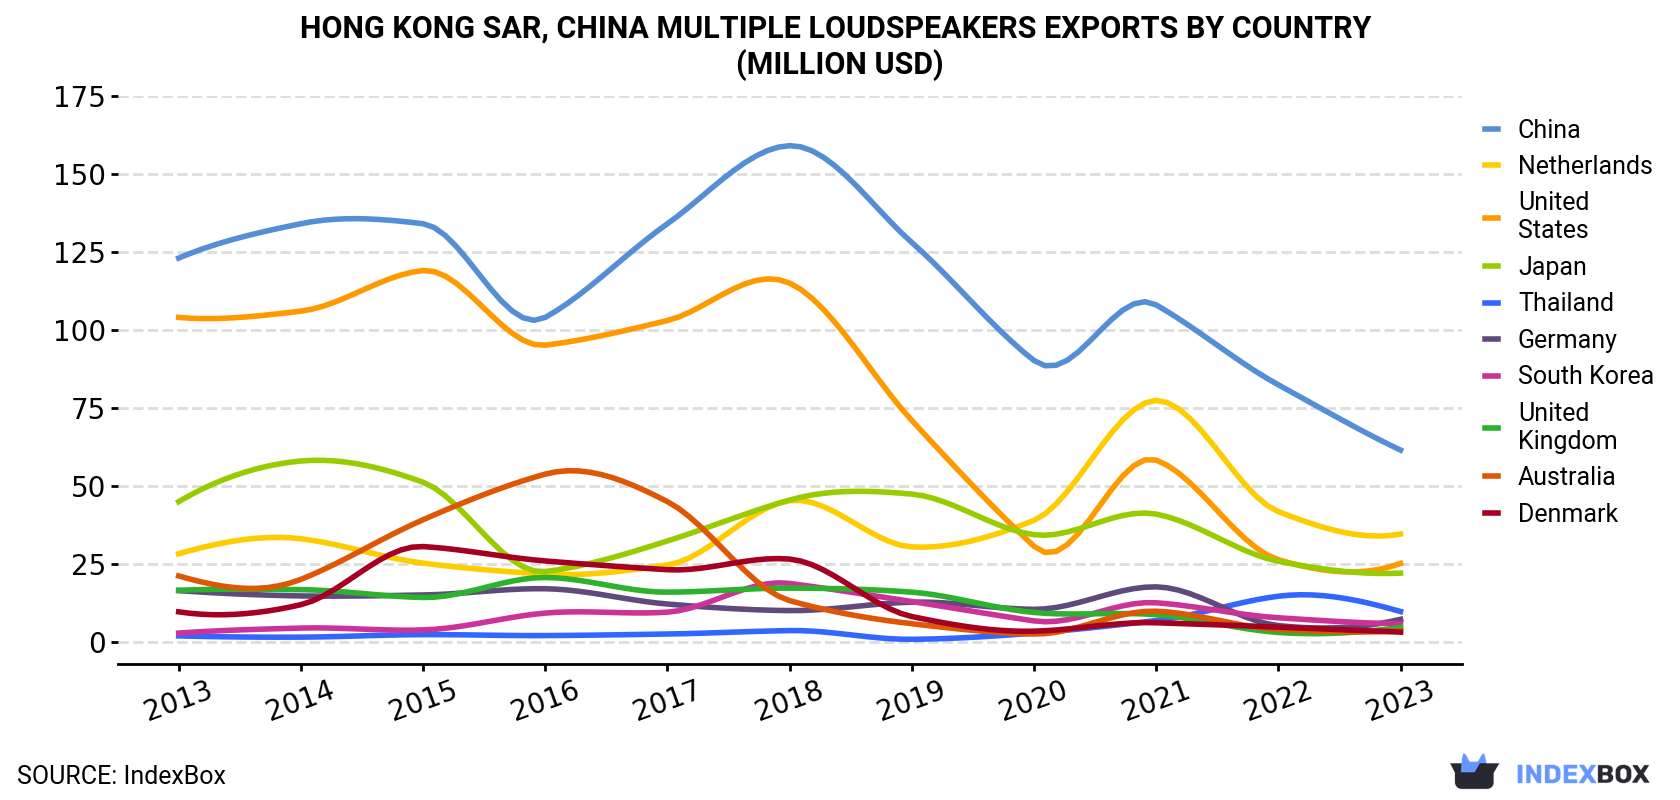 Hong Kong Multiple Loudspeakers Exports By Country (Million USD)